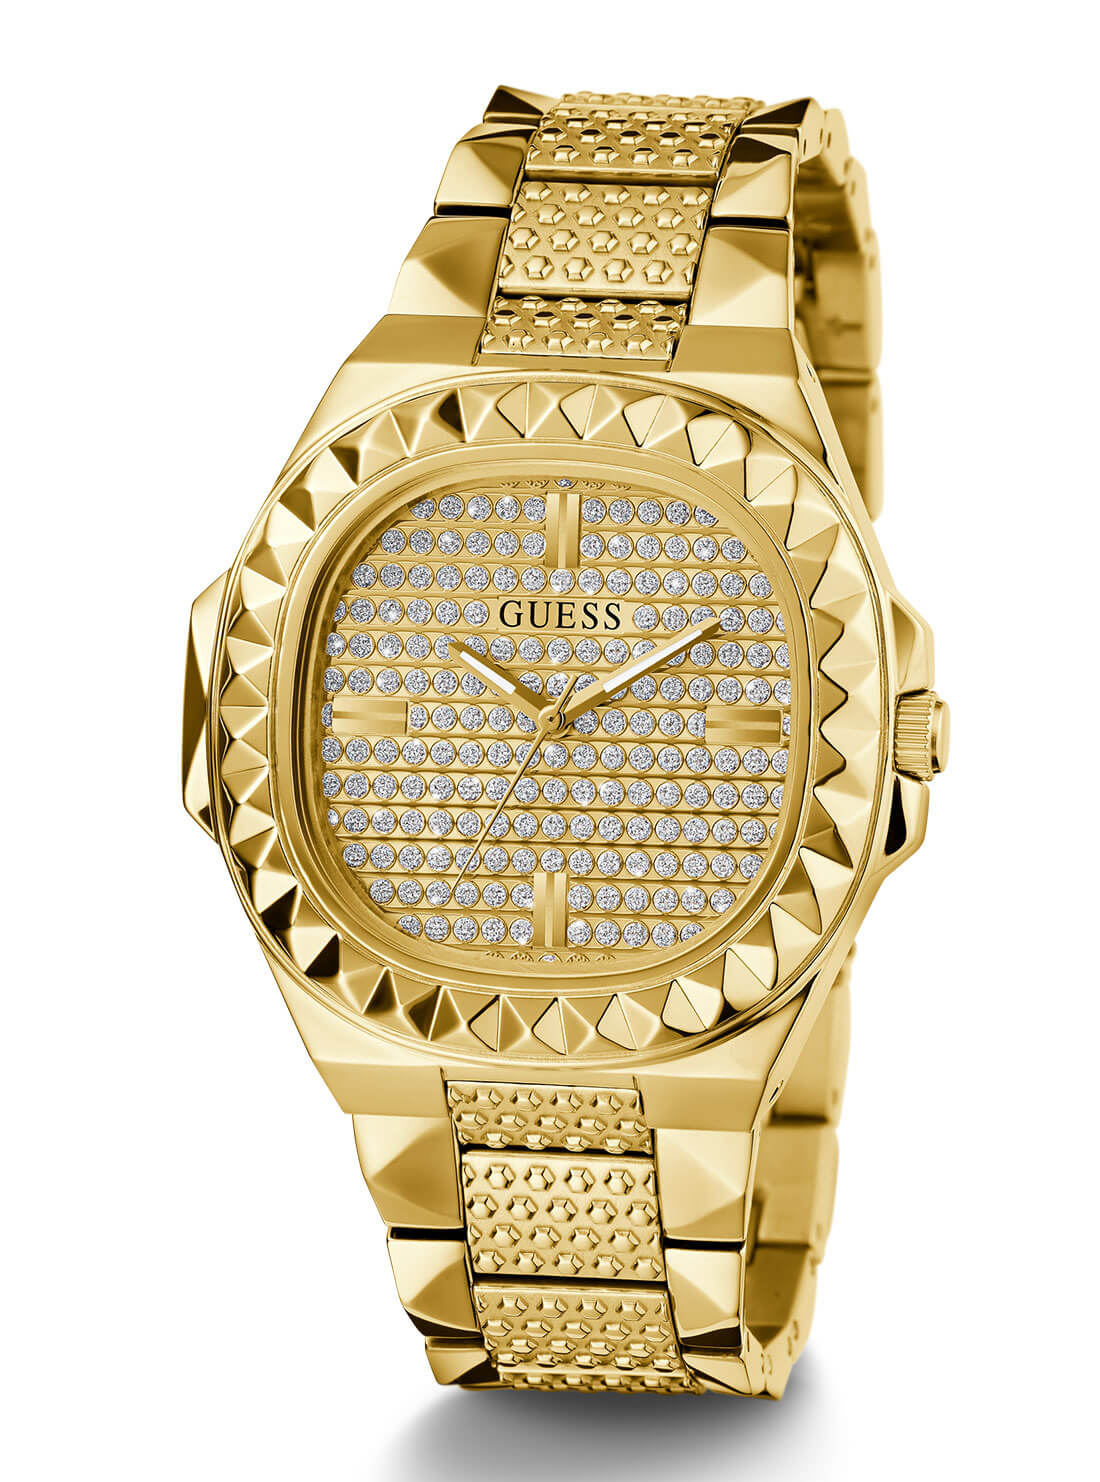 Gold Rebel Crystal Watch | GUESS Men's watches | front view alternative